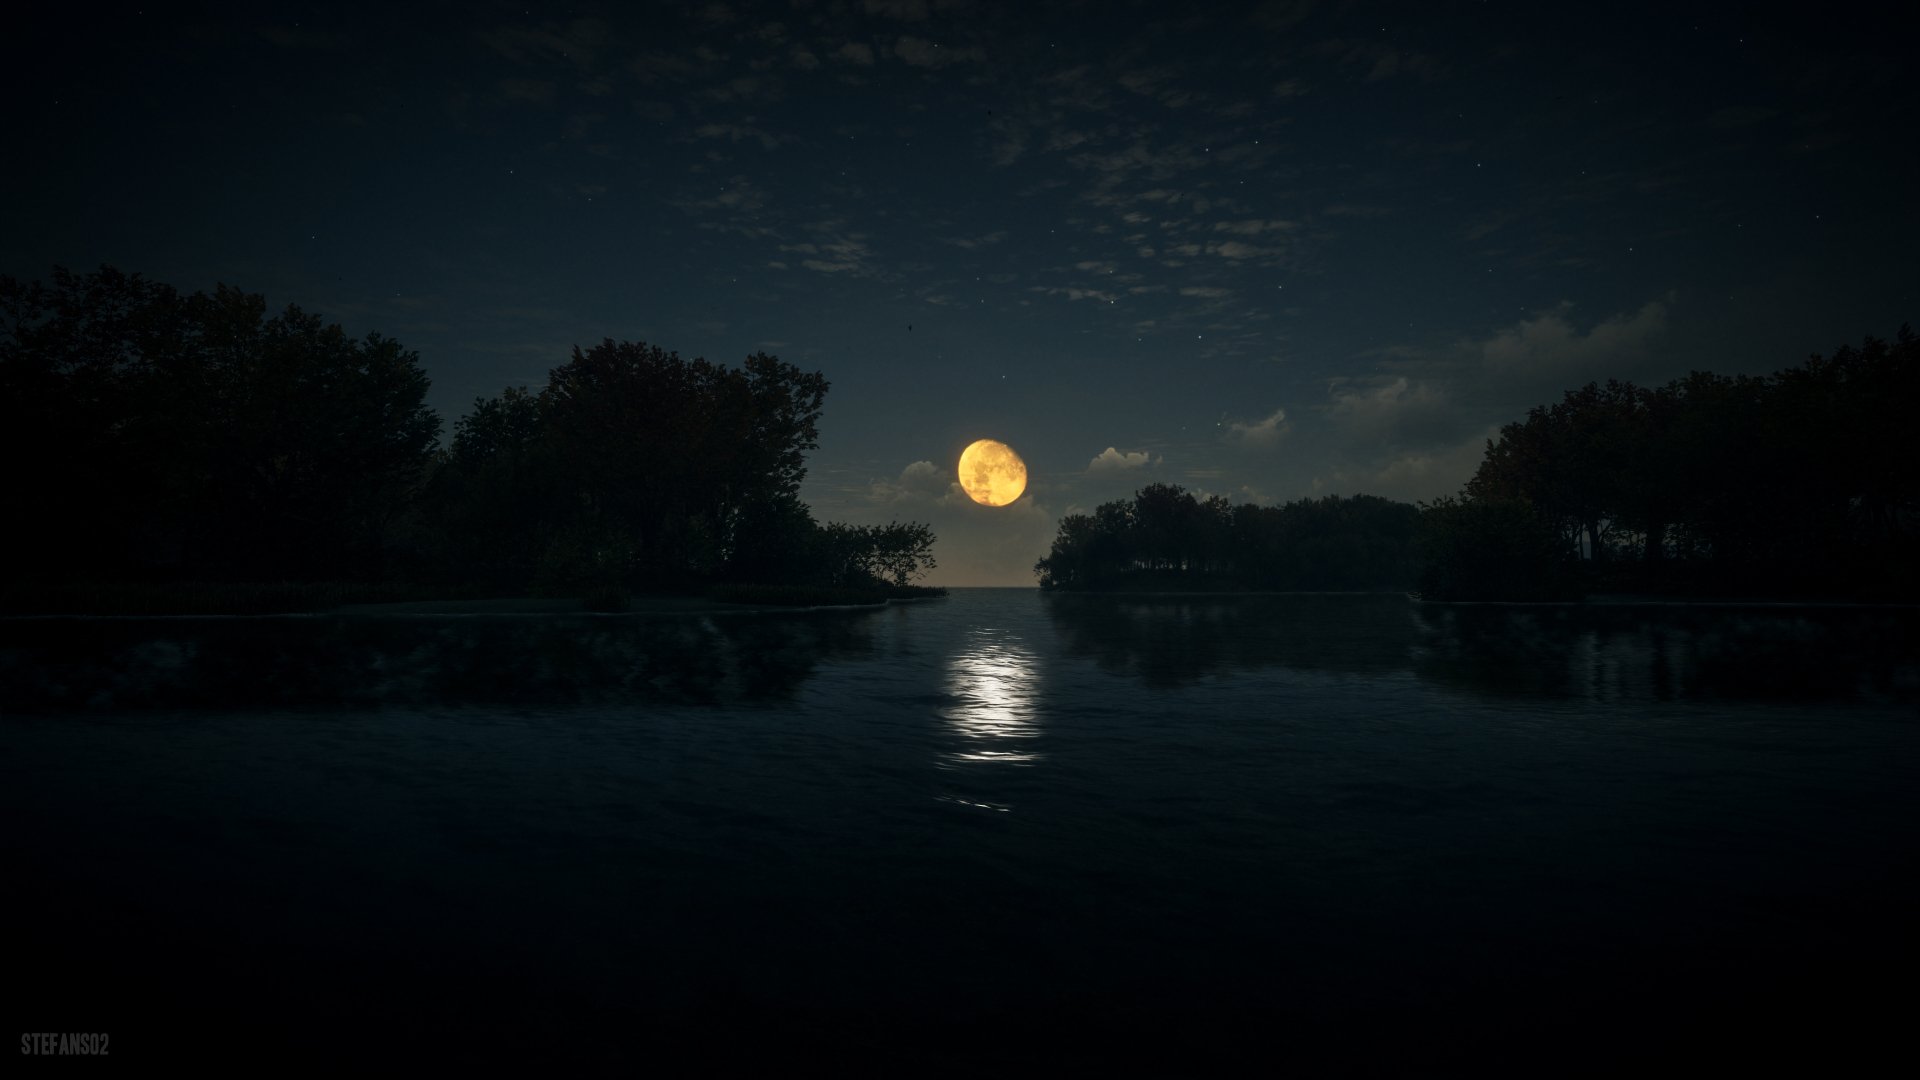 TheHunter: Call of the Wild / The River at Night